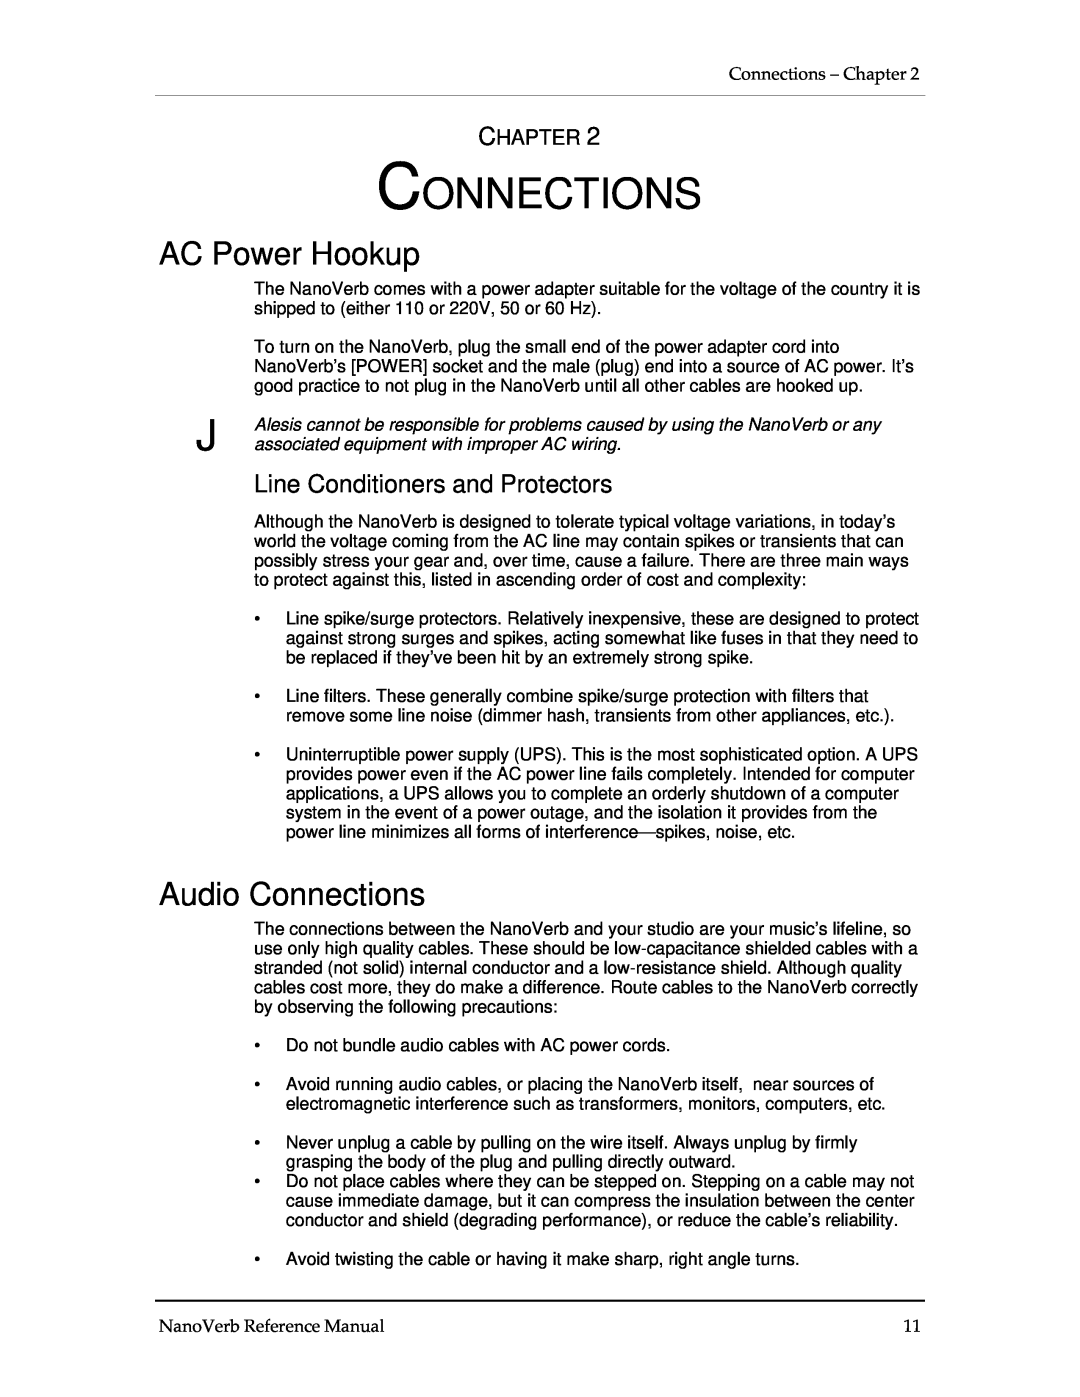 Alesis Stereo Amplifier manual AC Power Hookup, Audio Connections, Line Conditioners and Protectors, Chapter 